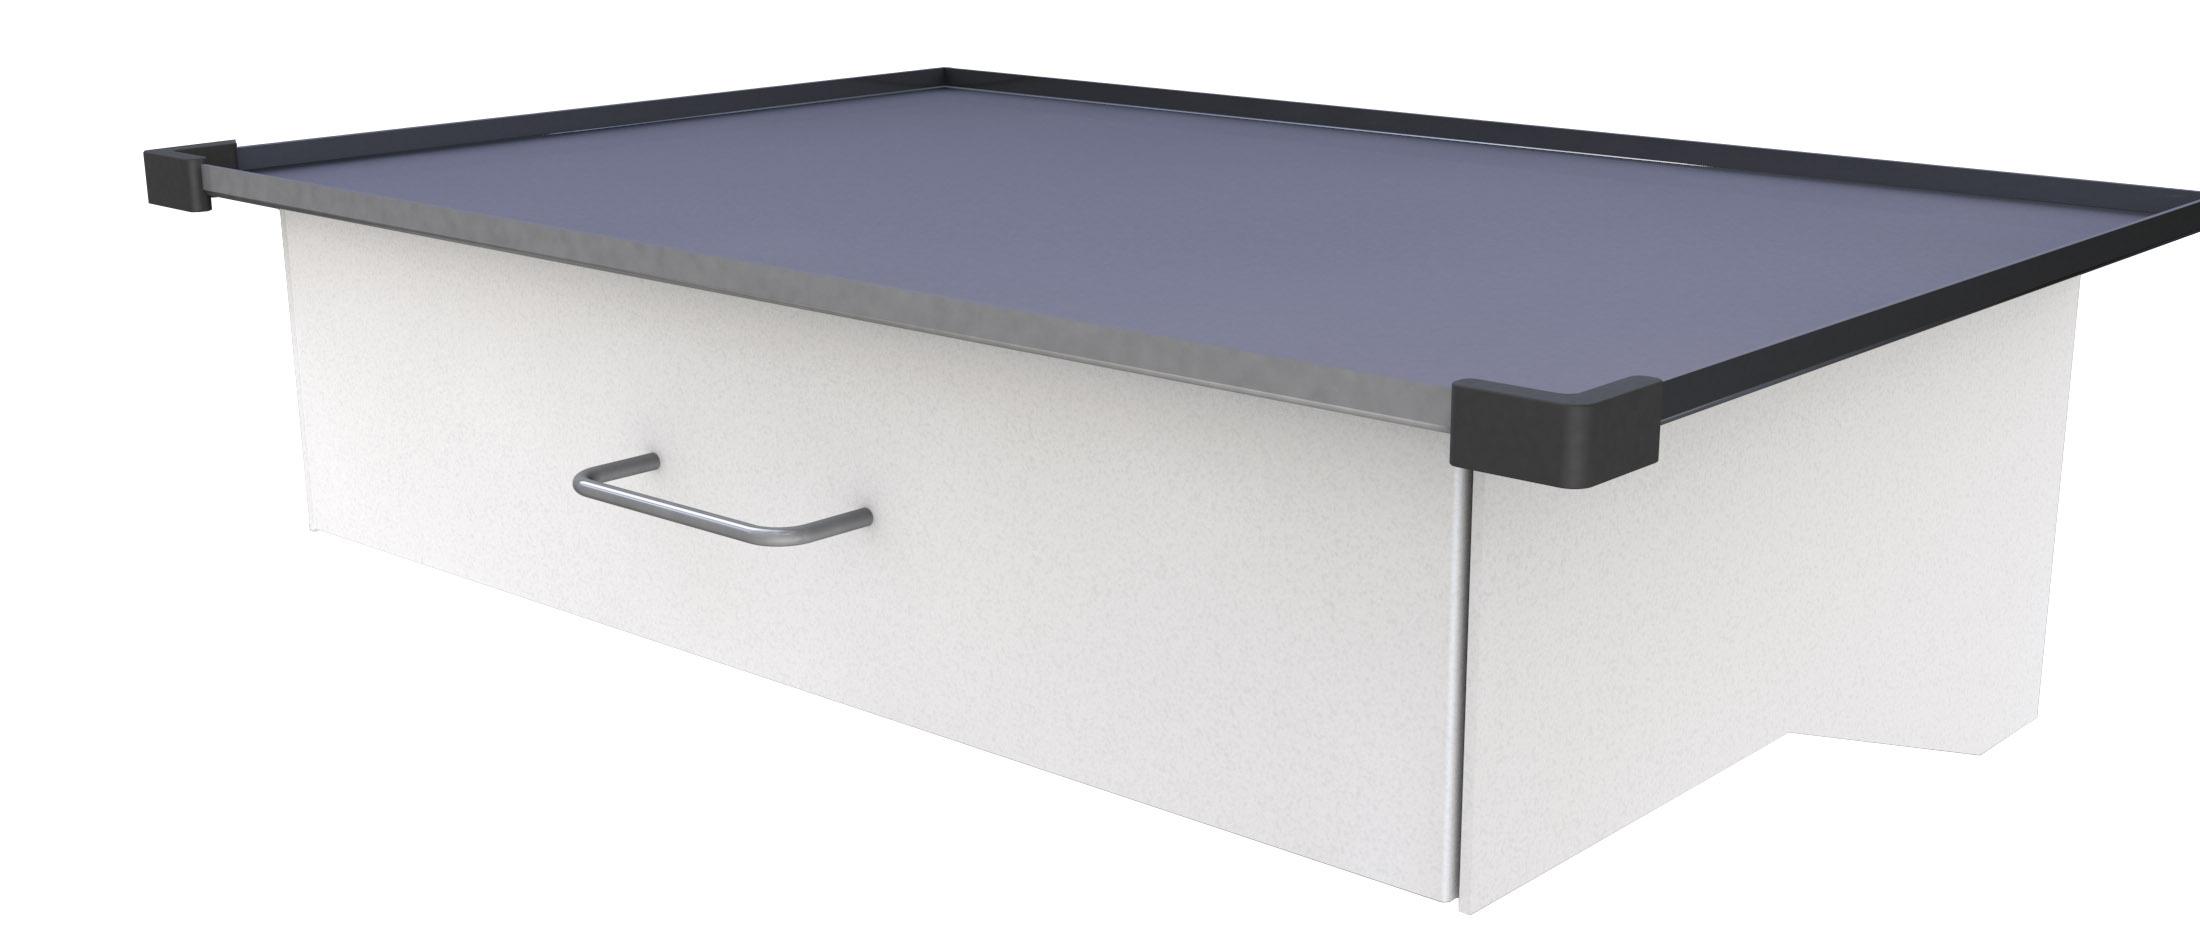 Main photo of the product with name, Shelf with 1 drawer